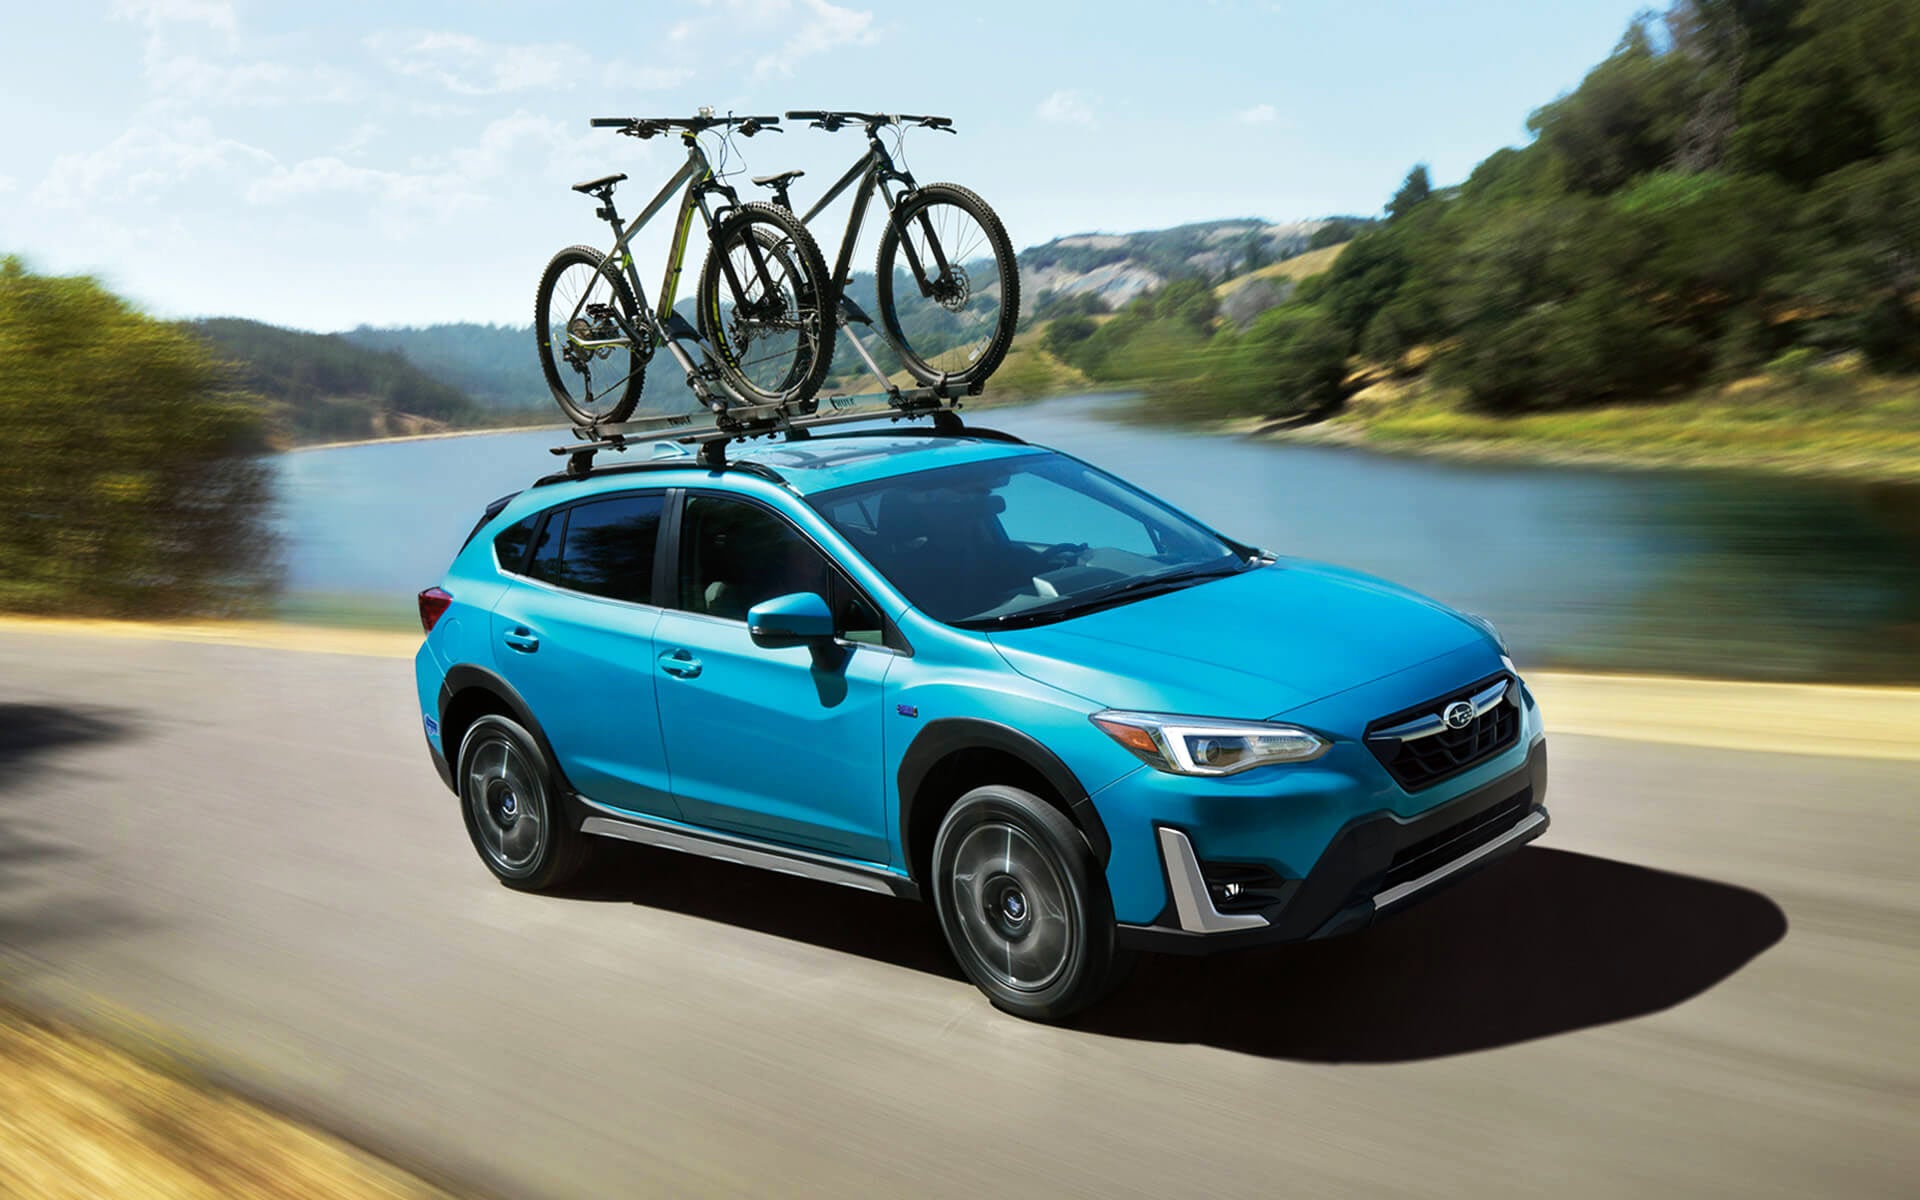 A blue Crosstrek Hybrid with two bicycles on its roof rack driving beside a river | John Kennedy Subaru in Plymouth Meeting PA